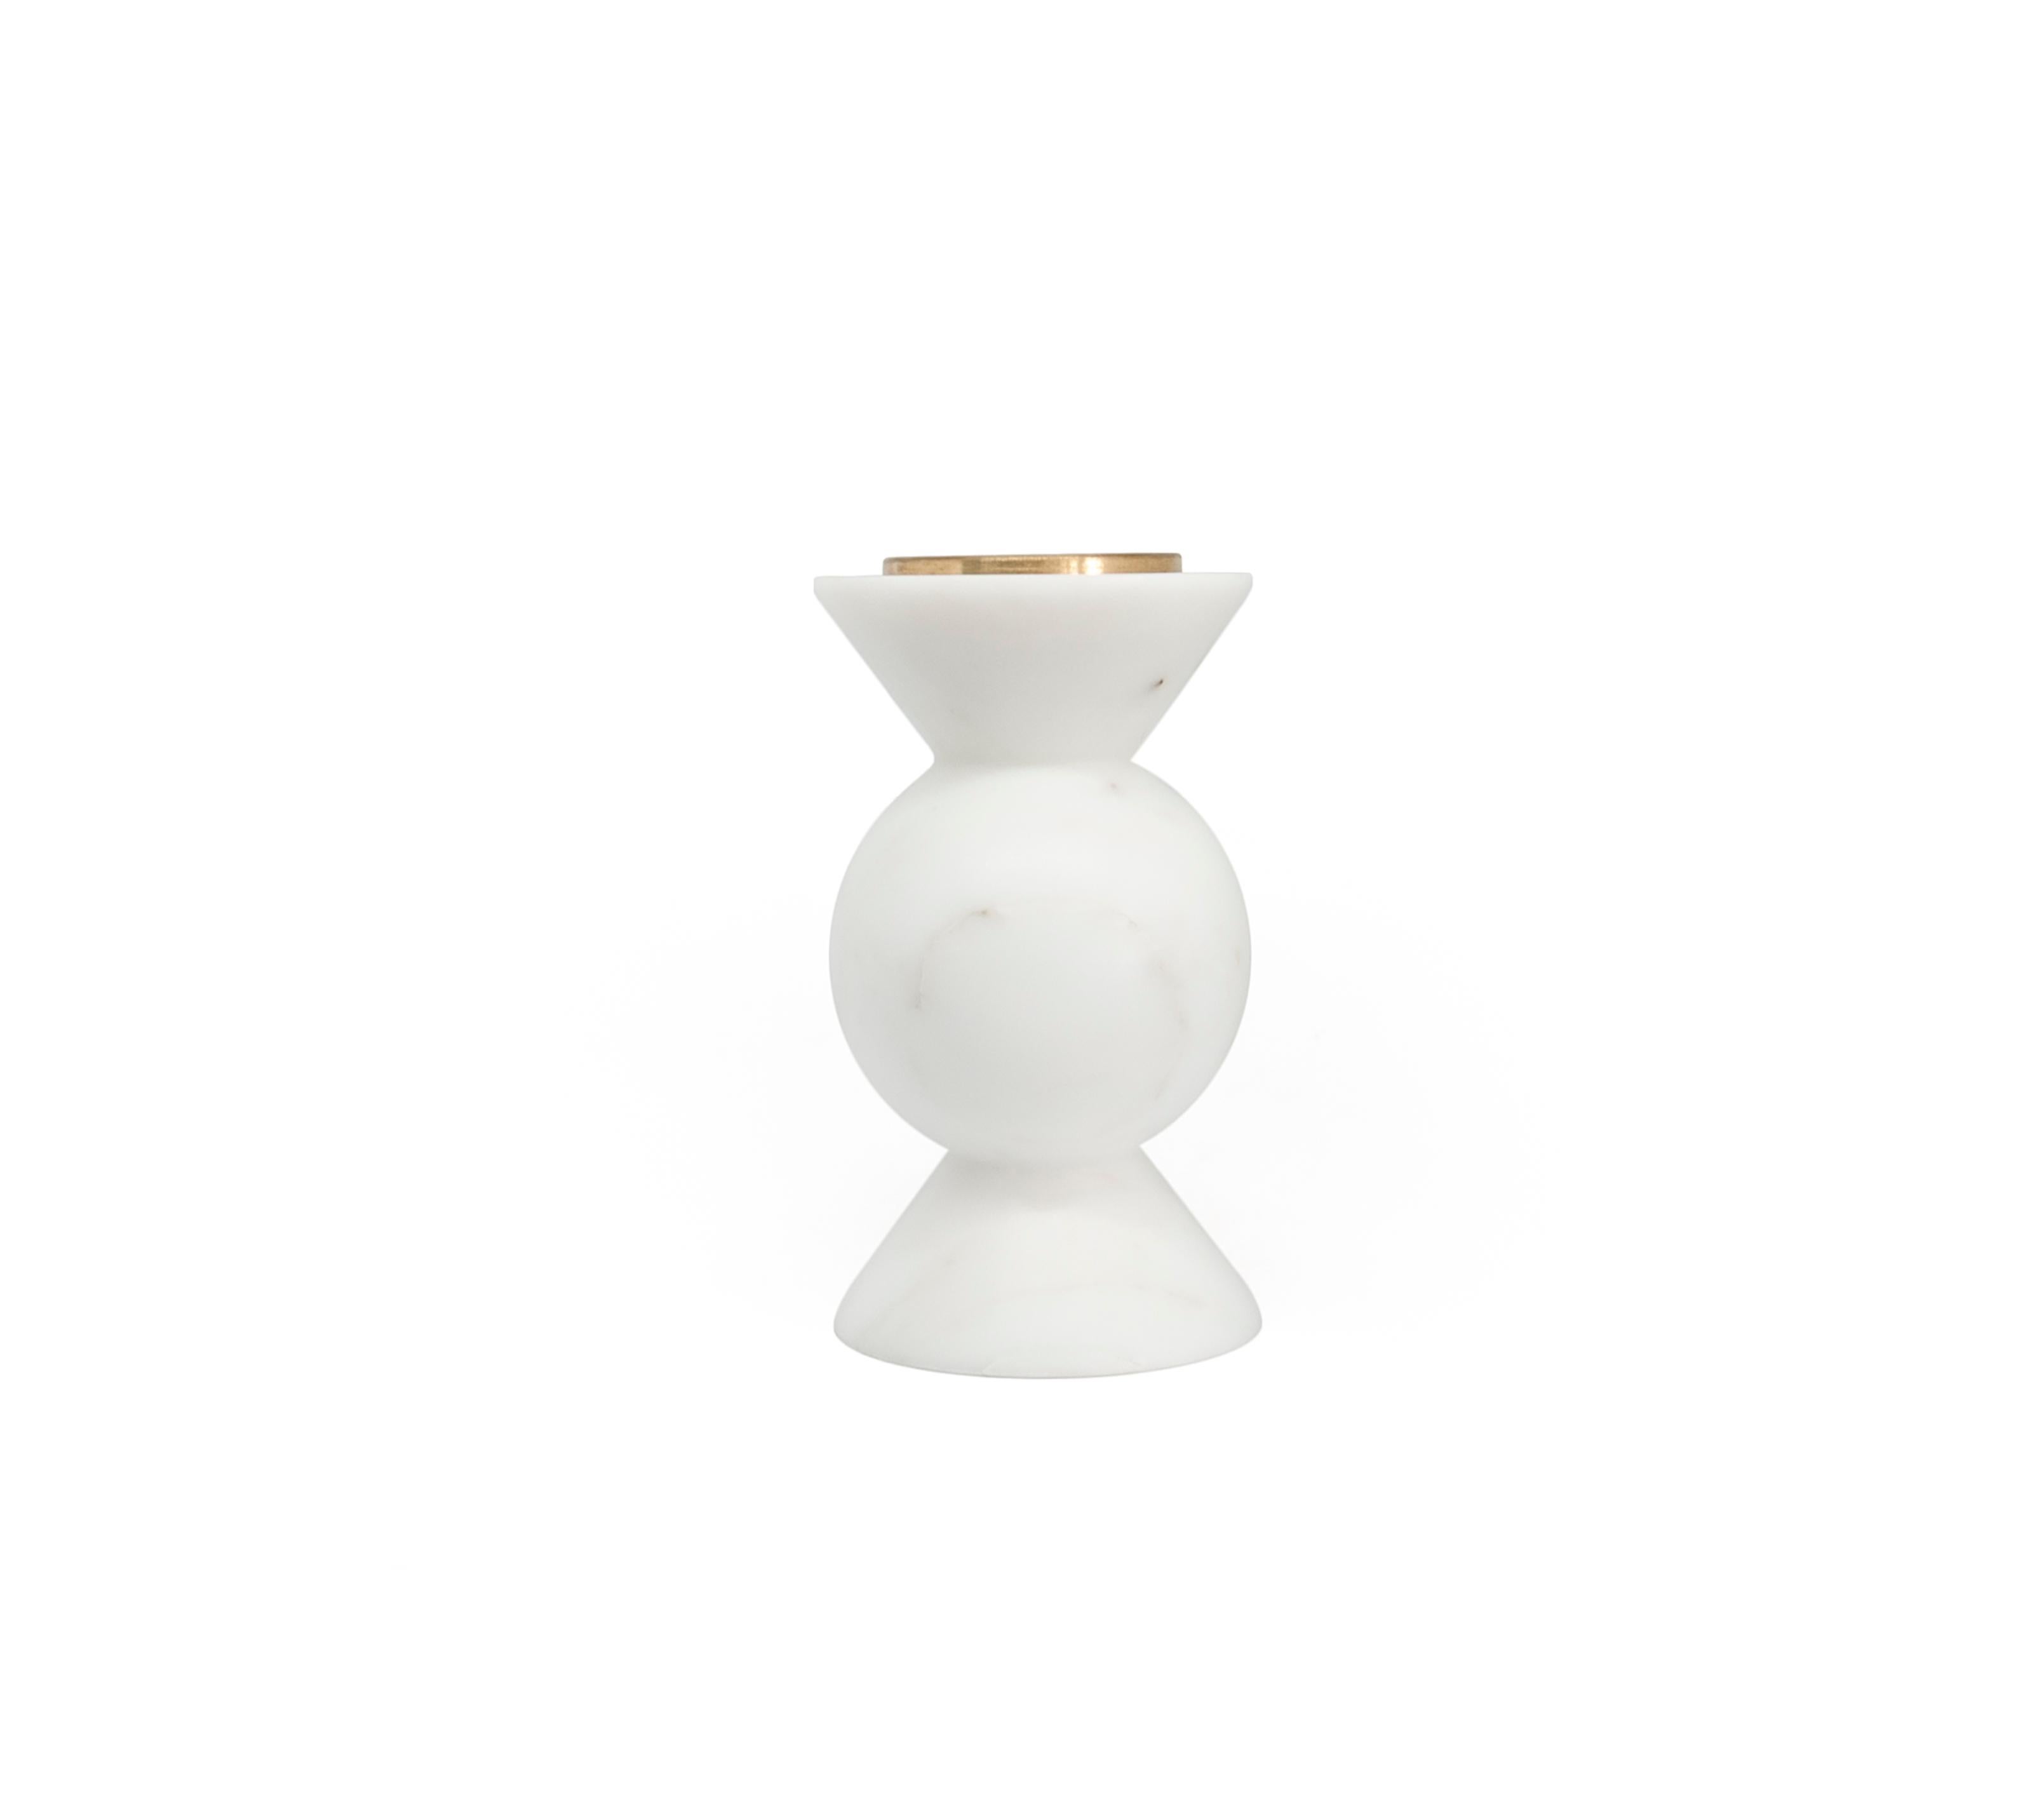 Short rounded unicolor candleholder in white Carrara marble and brass.
-Jacopo Simonetti design for FiammettaV-
Each piece is in a way unique (every marble block is different in veins and shades) and handmade by Italian artisans specialized over